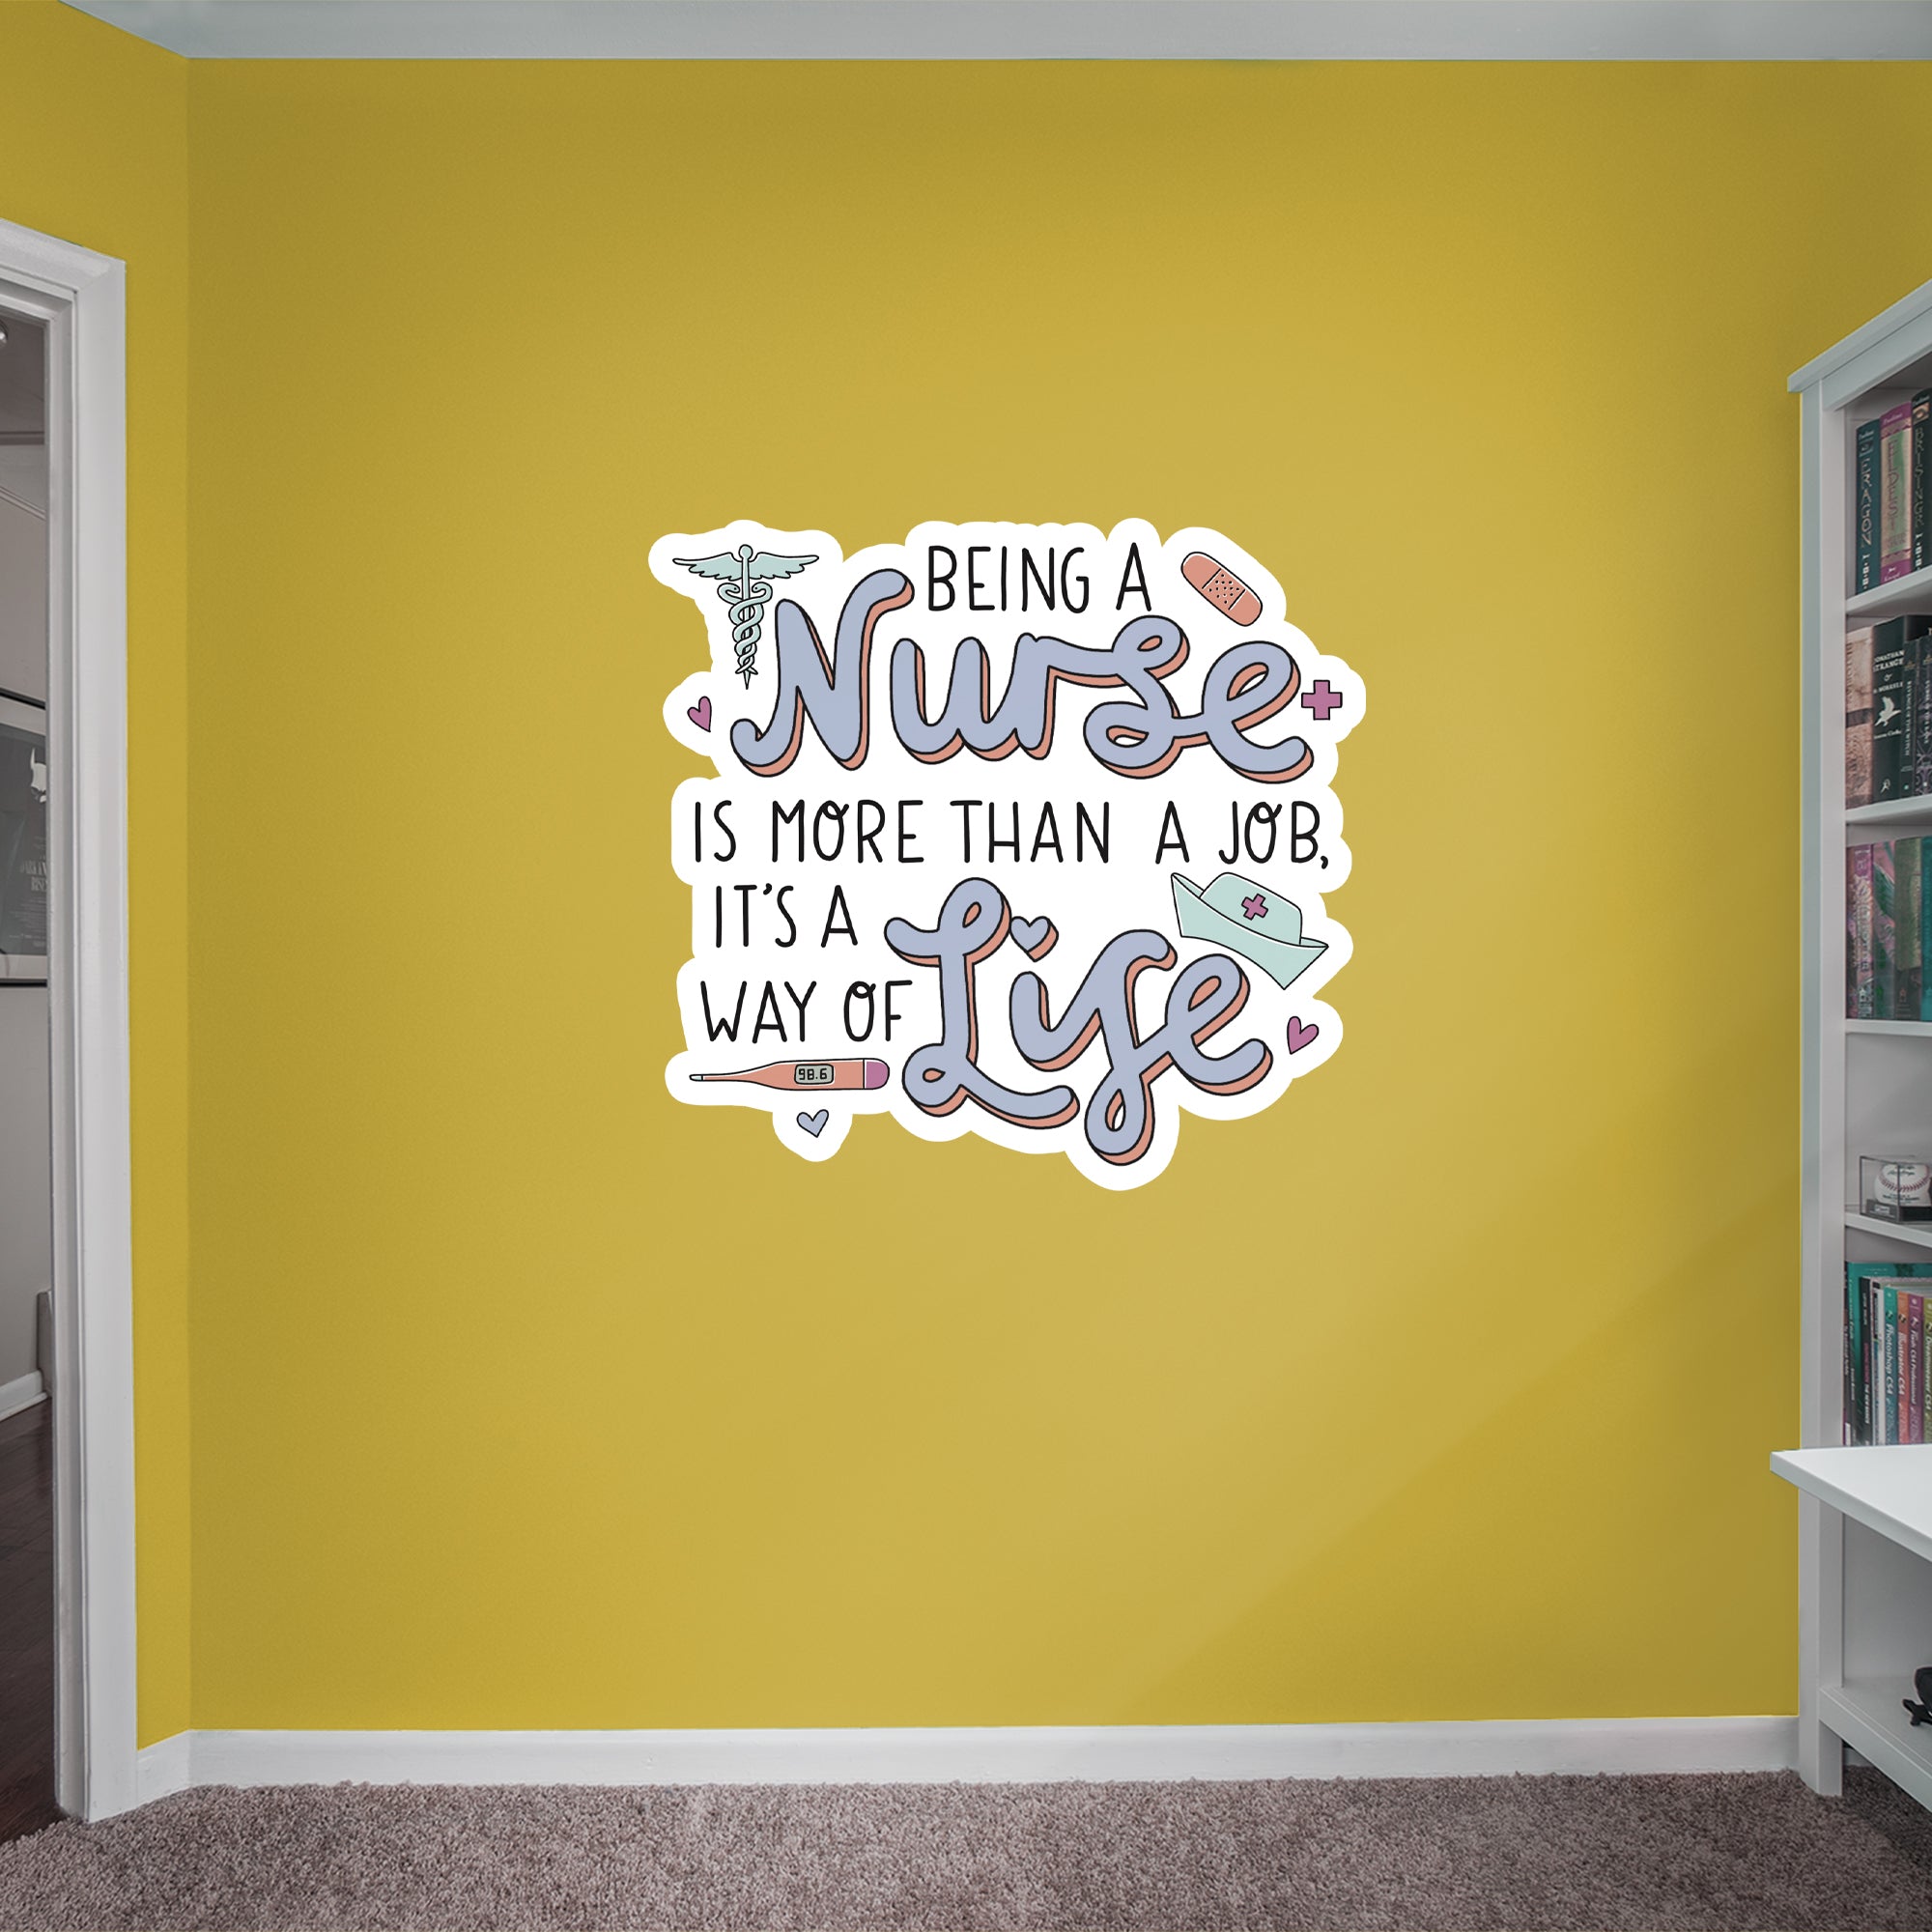 Being A Nurse Way Of Life - Officially Licensed Big Moods Removable Wall Decal Large by Fathead | Vinyl